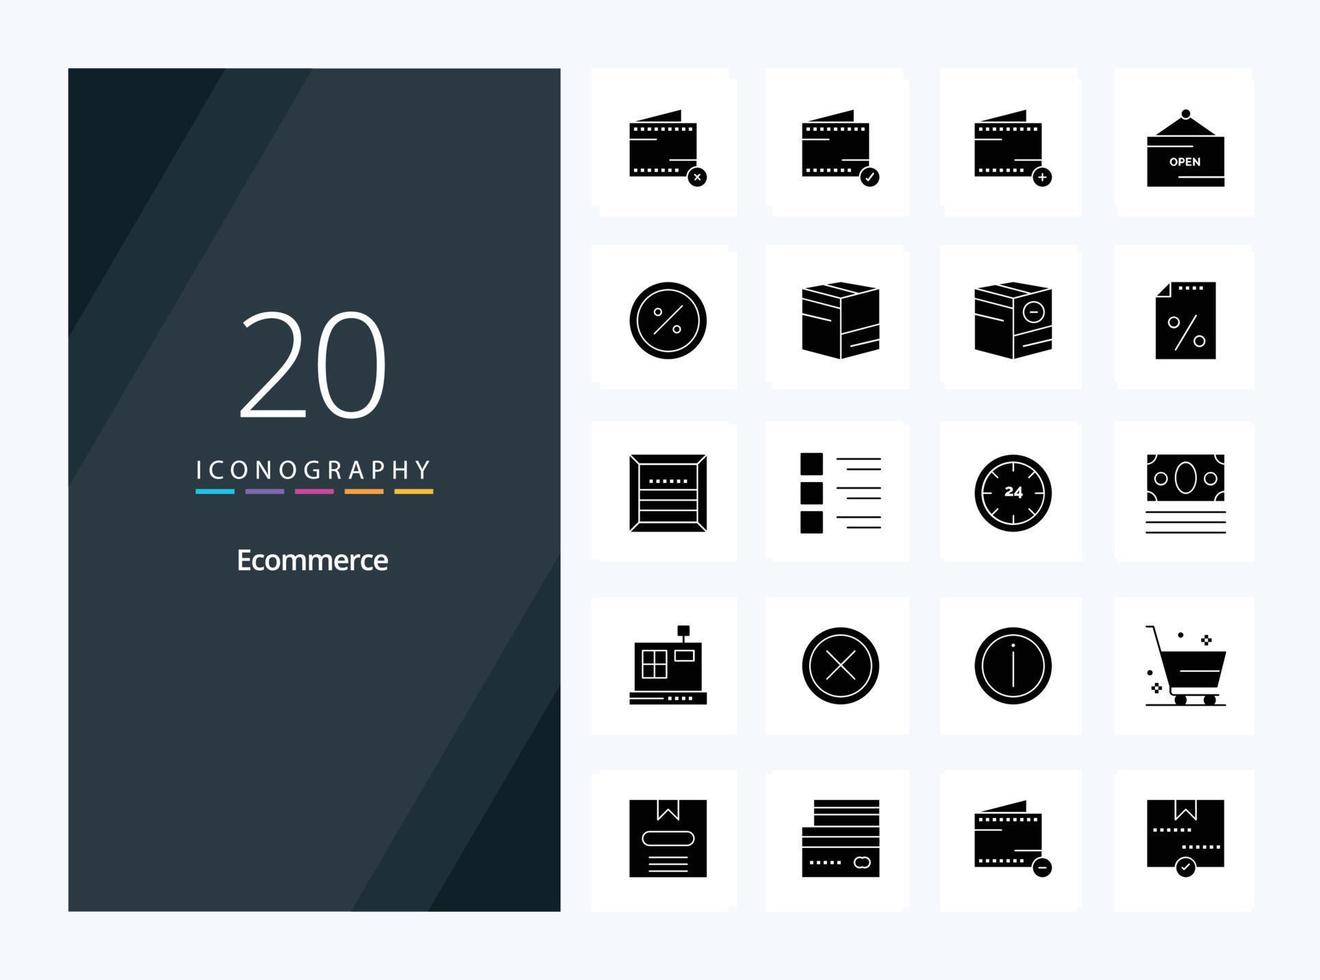 20 Ecommerce Solid Glyph icon for presentation vector